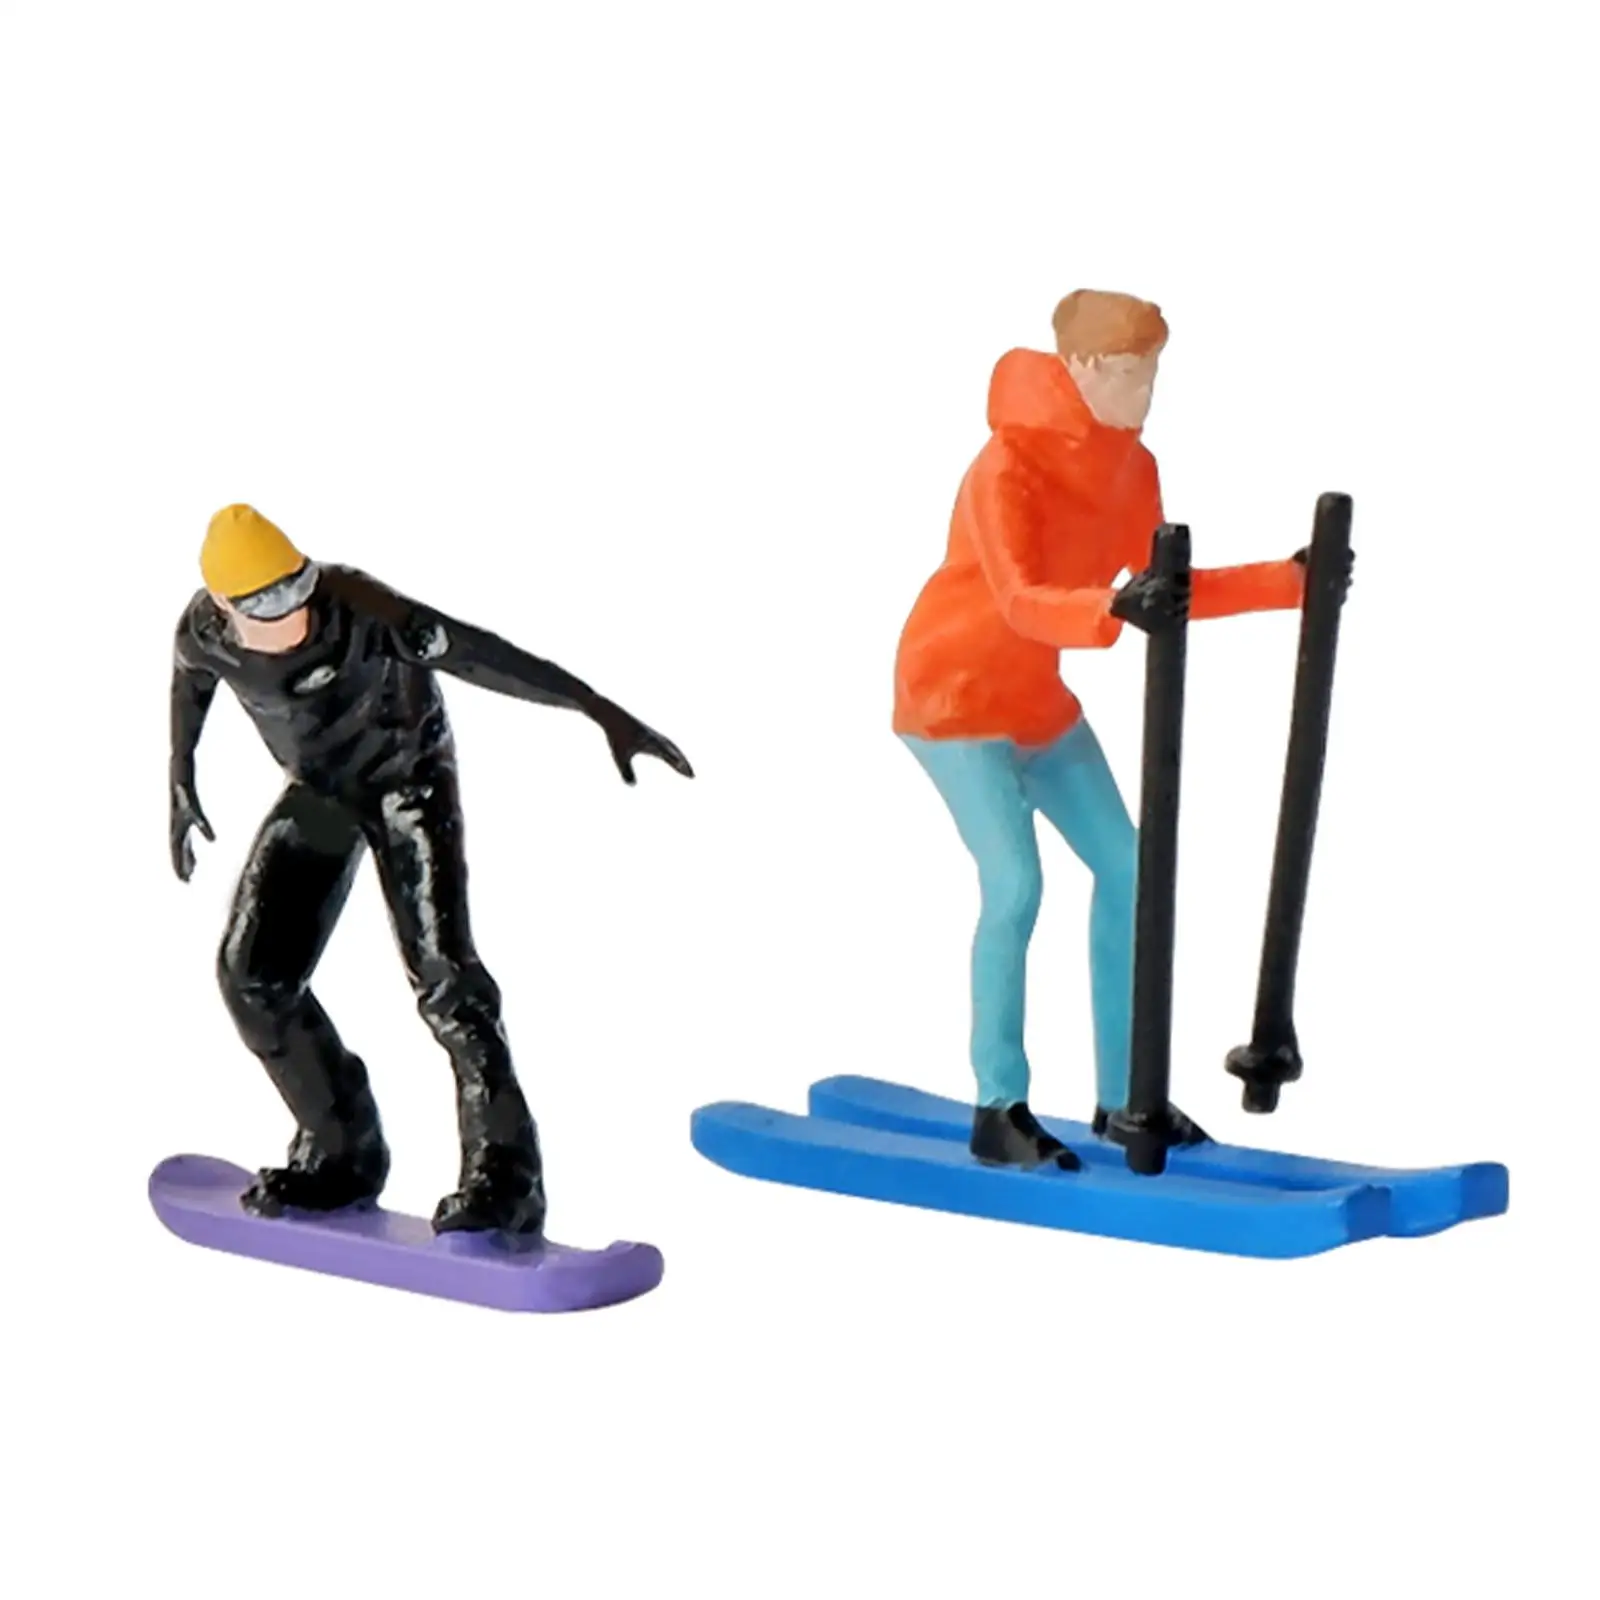 1/64 Scale Miniature Model Skiing Figures for Sand Table Diorama Layout